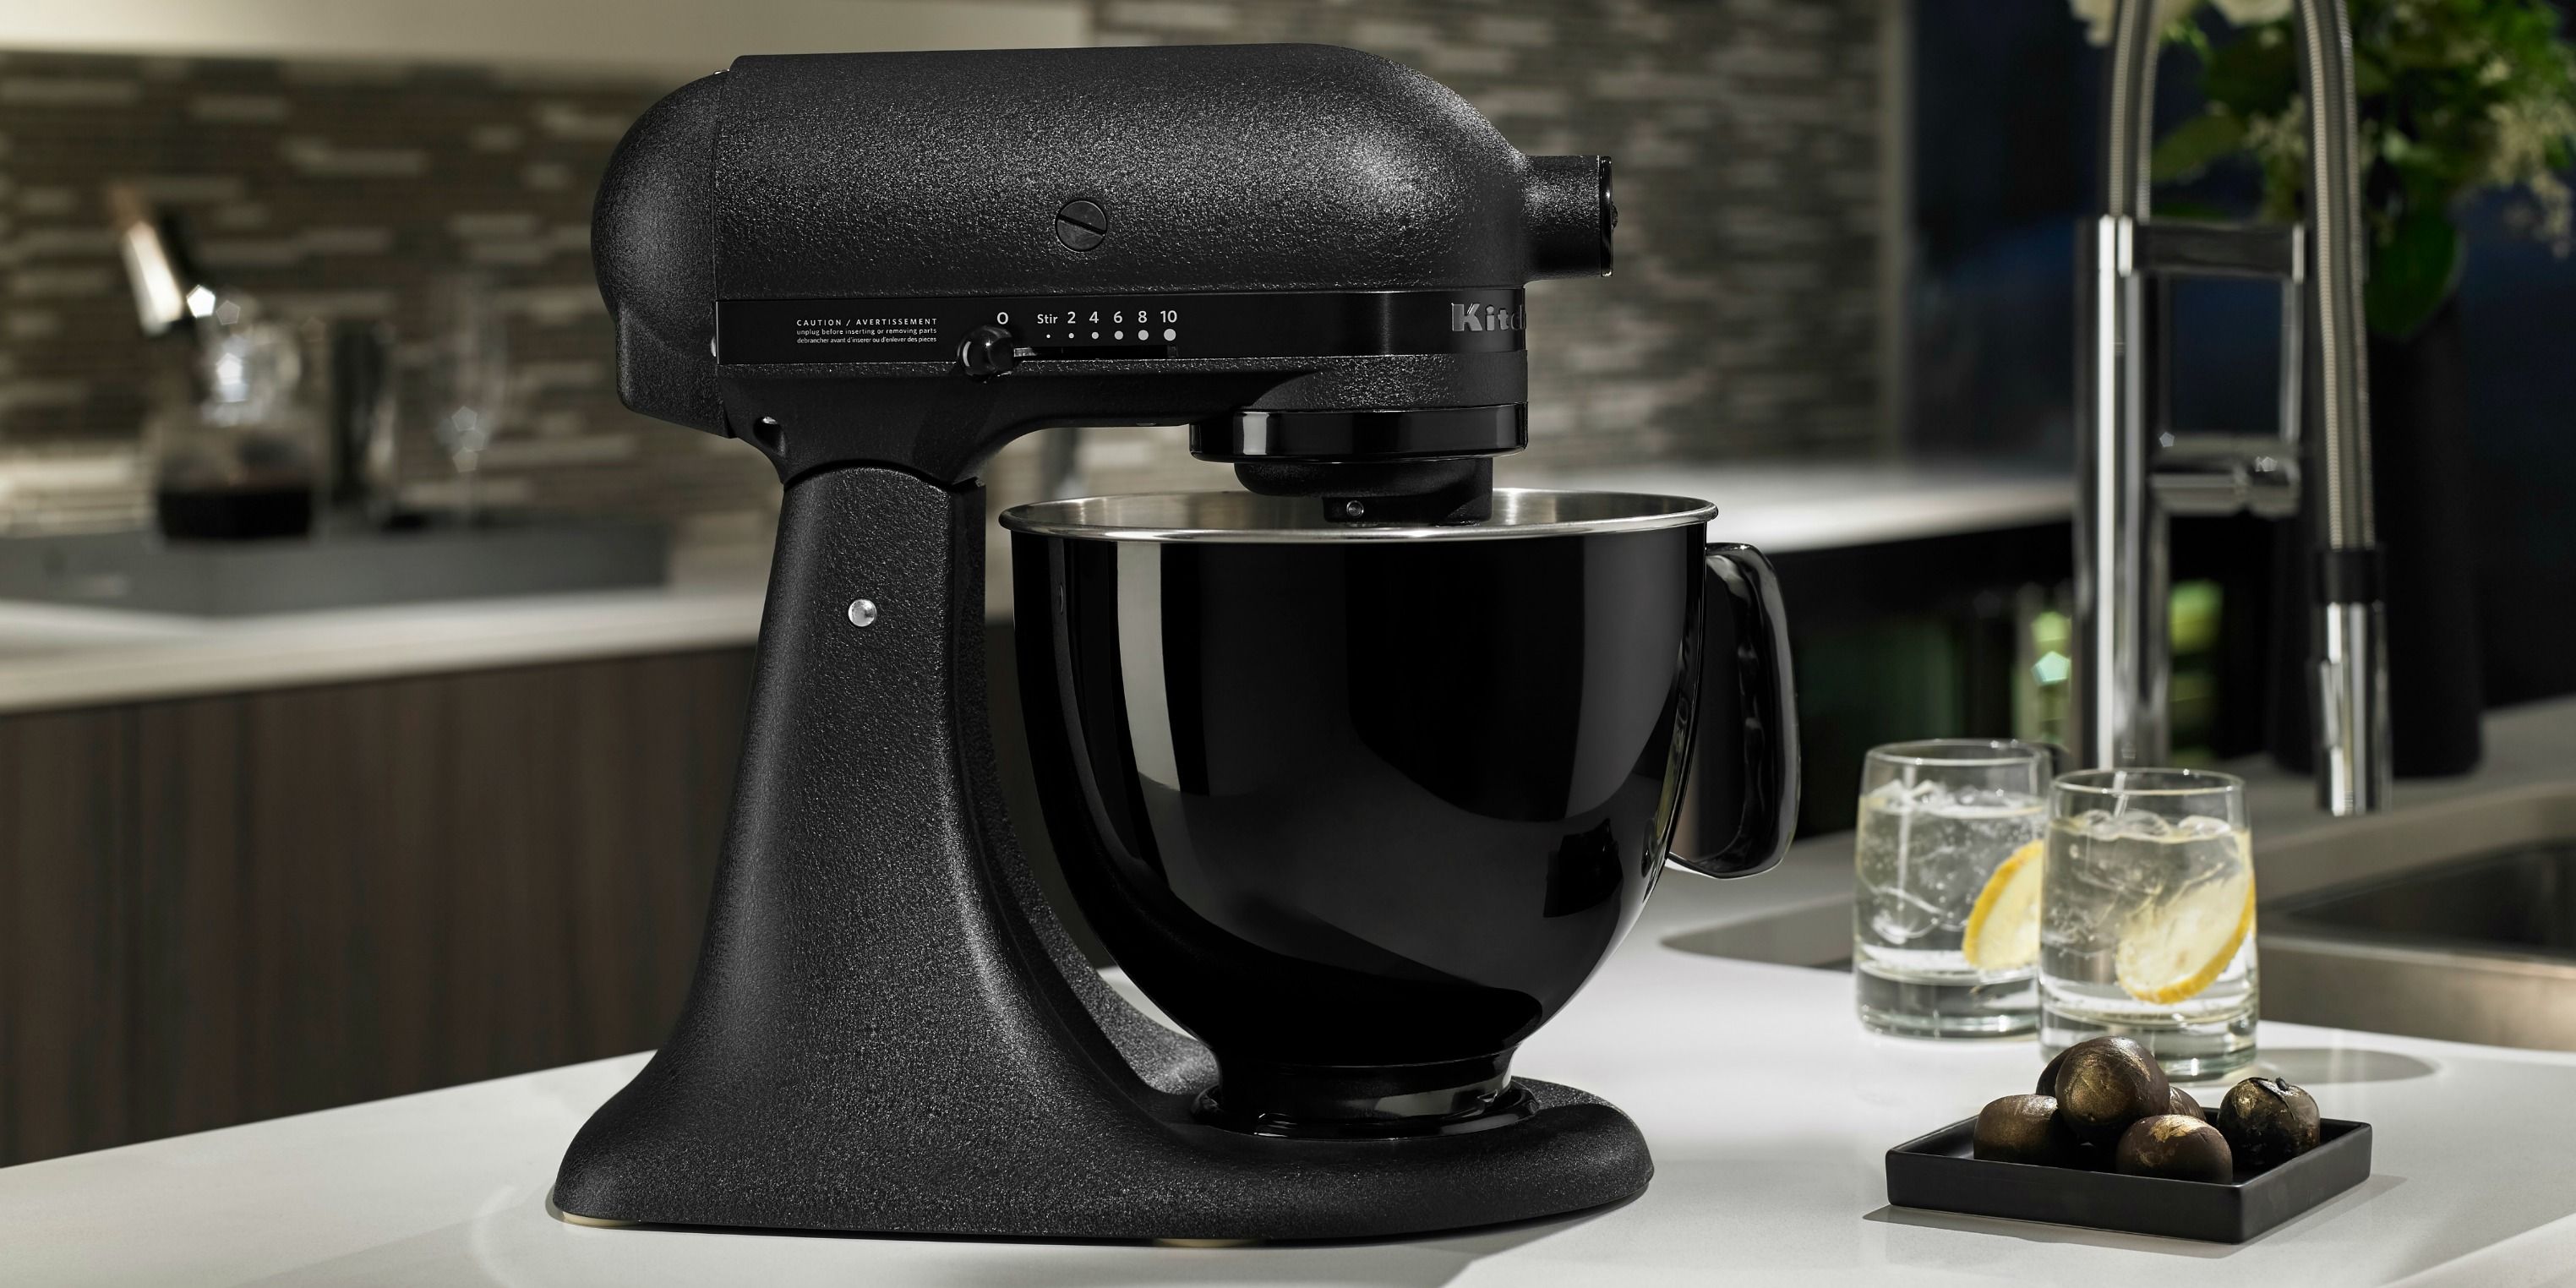 What You Should Know Before Buying A KitchenAid Stand Mixer